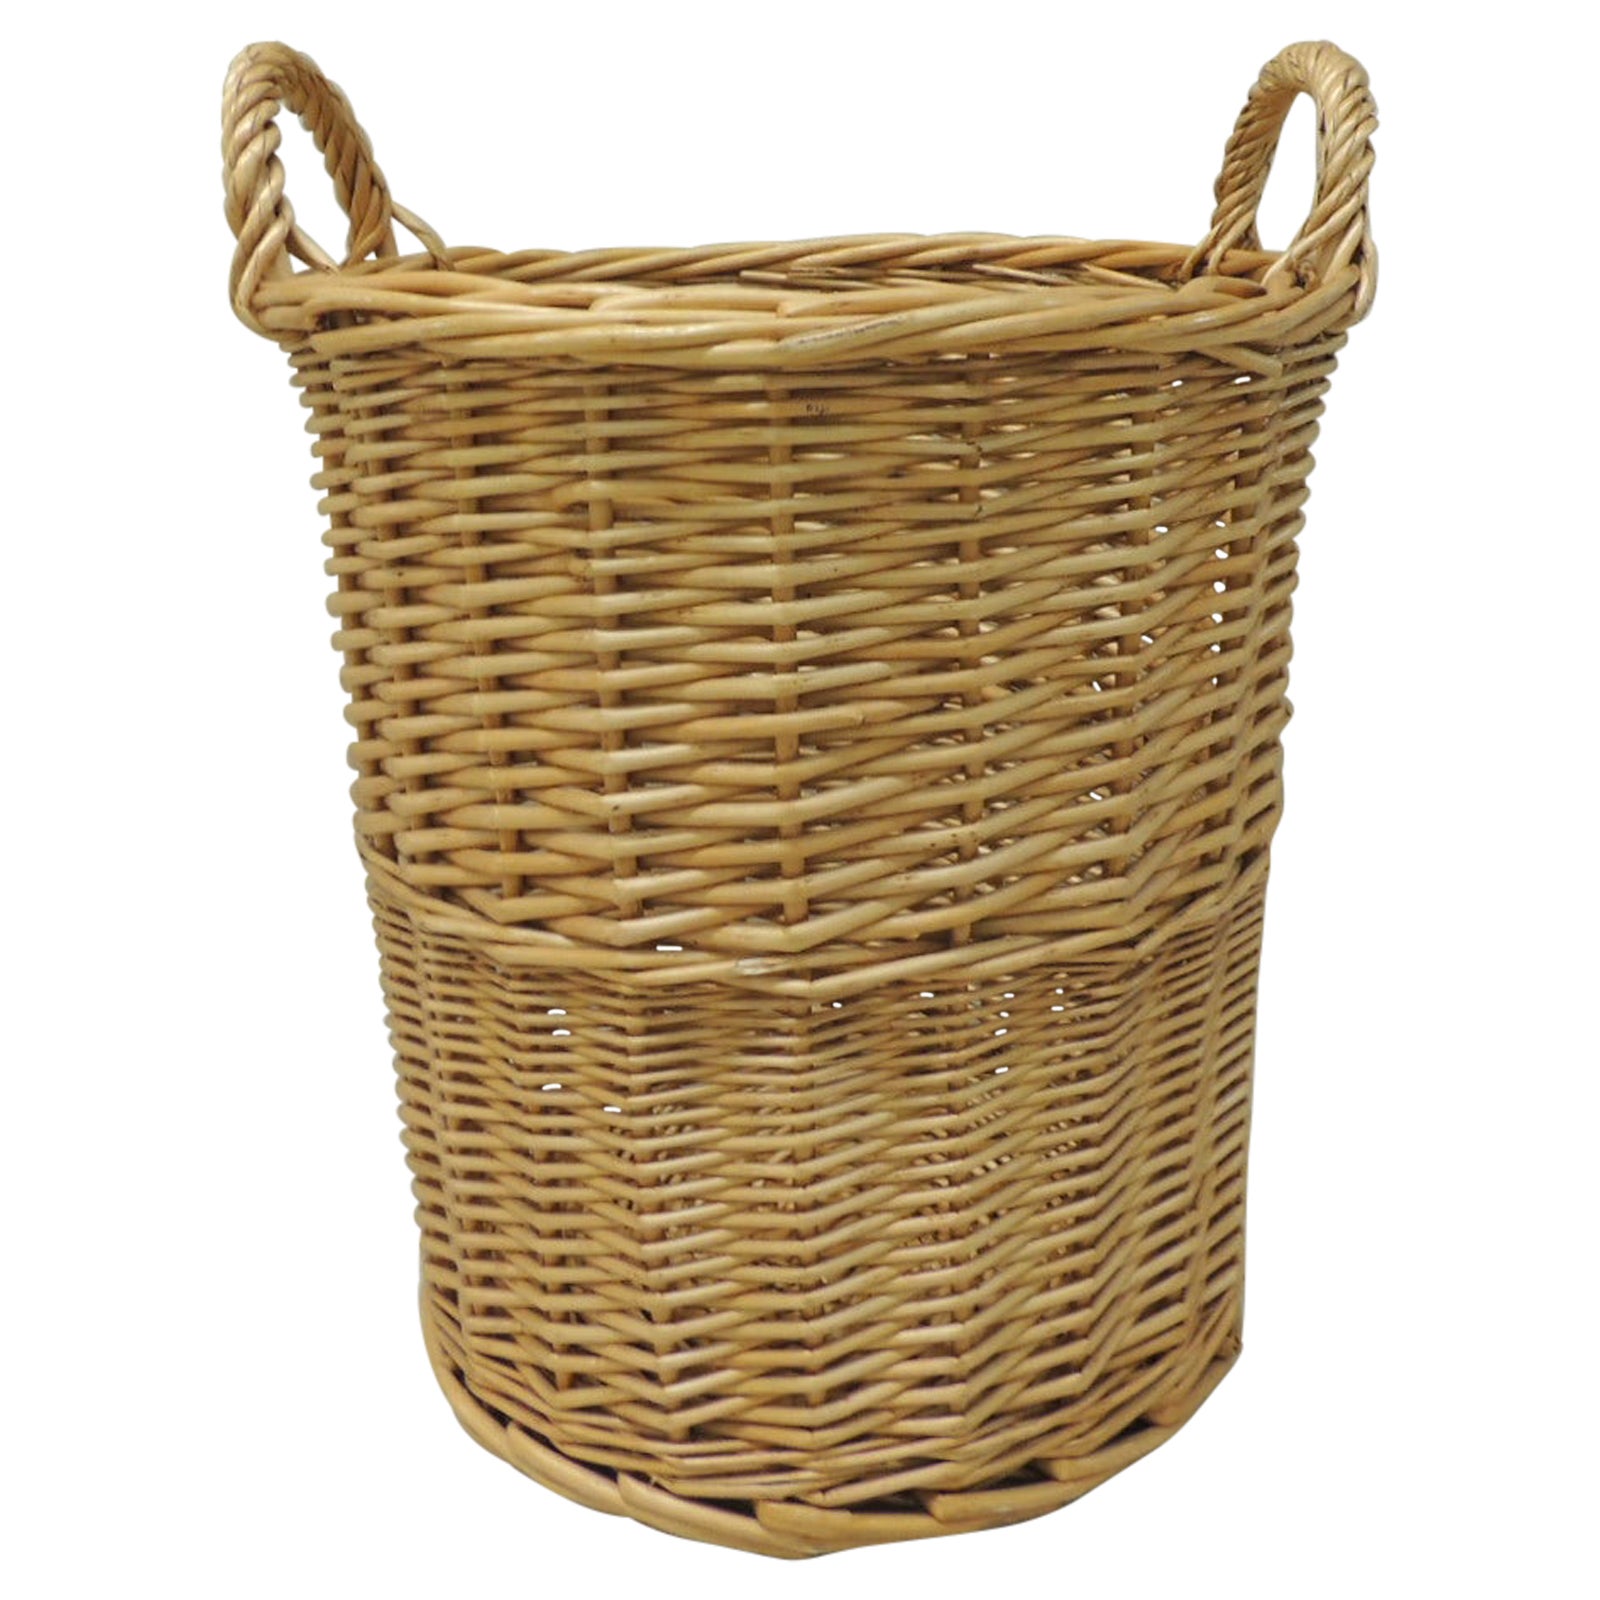 Round Woven Basket or Wastebasket with Handles